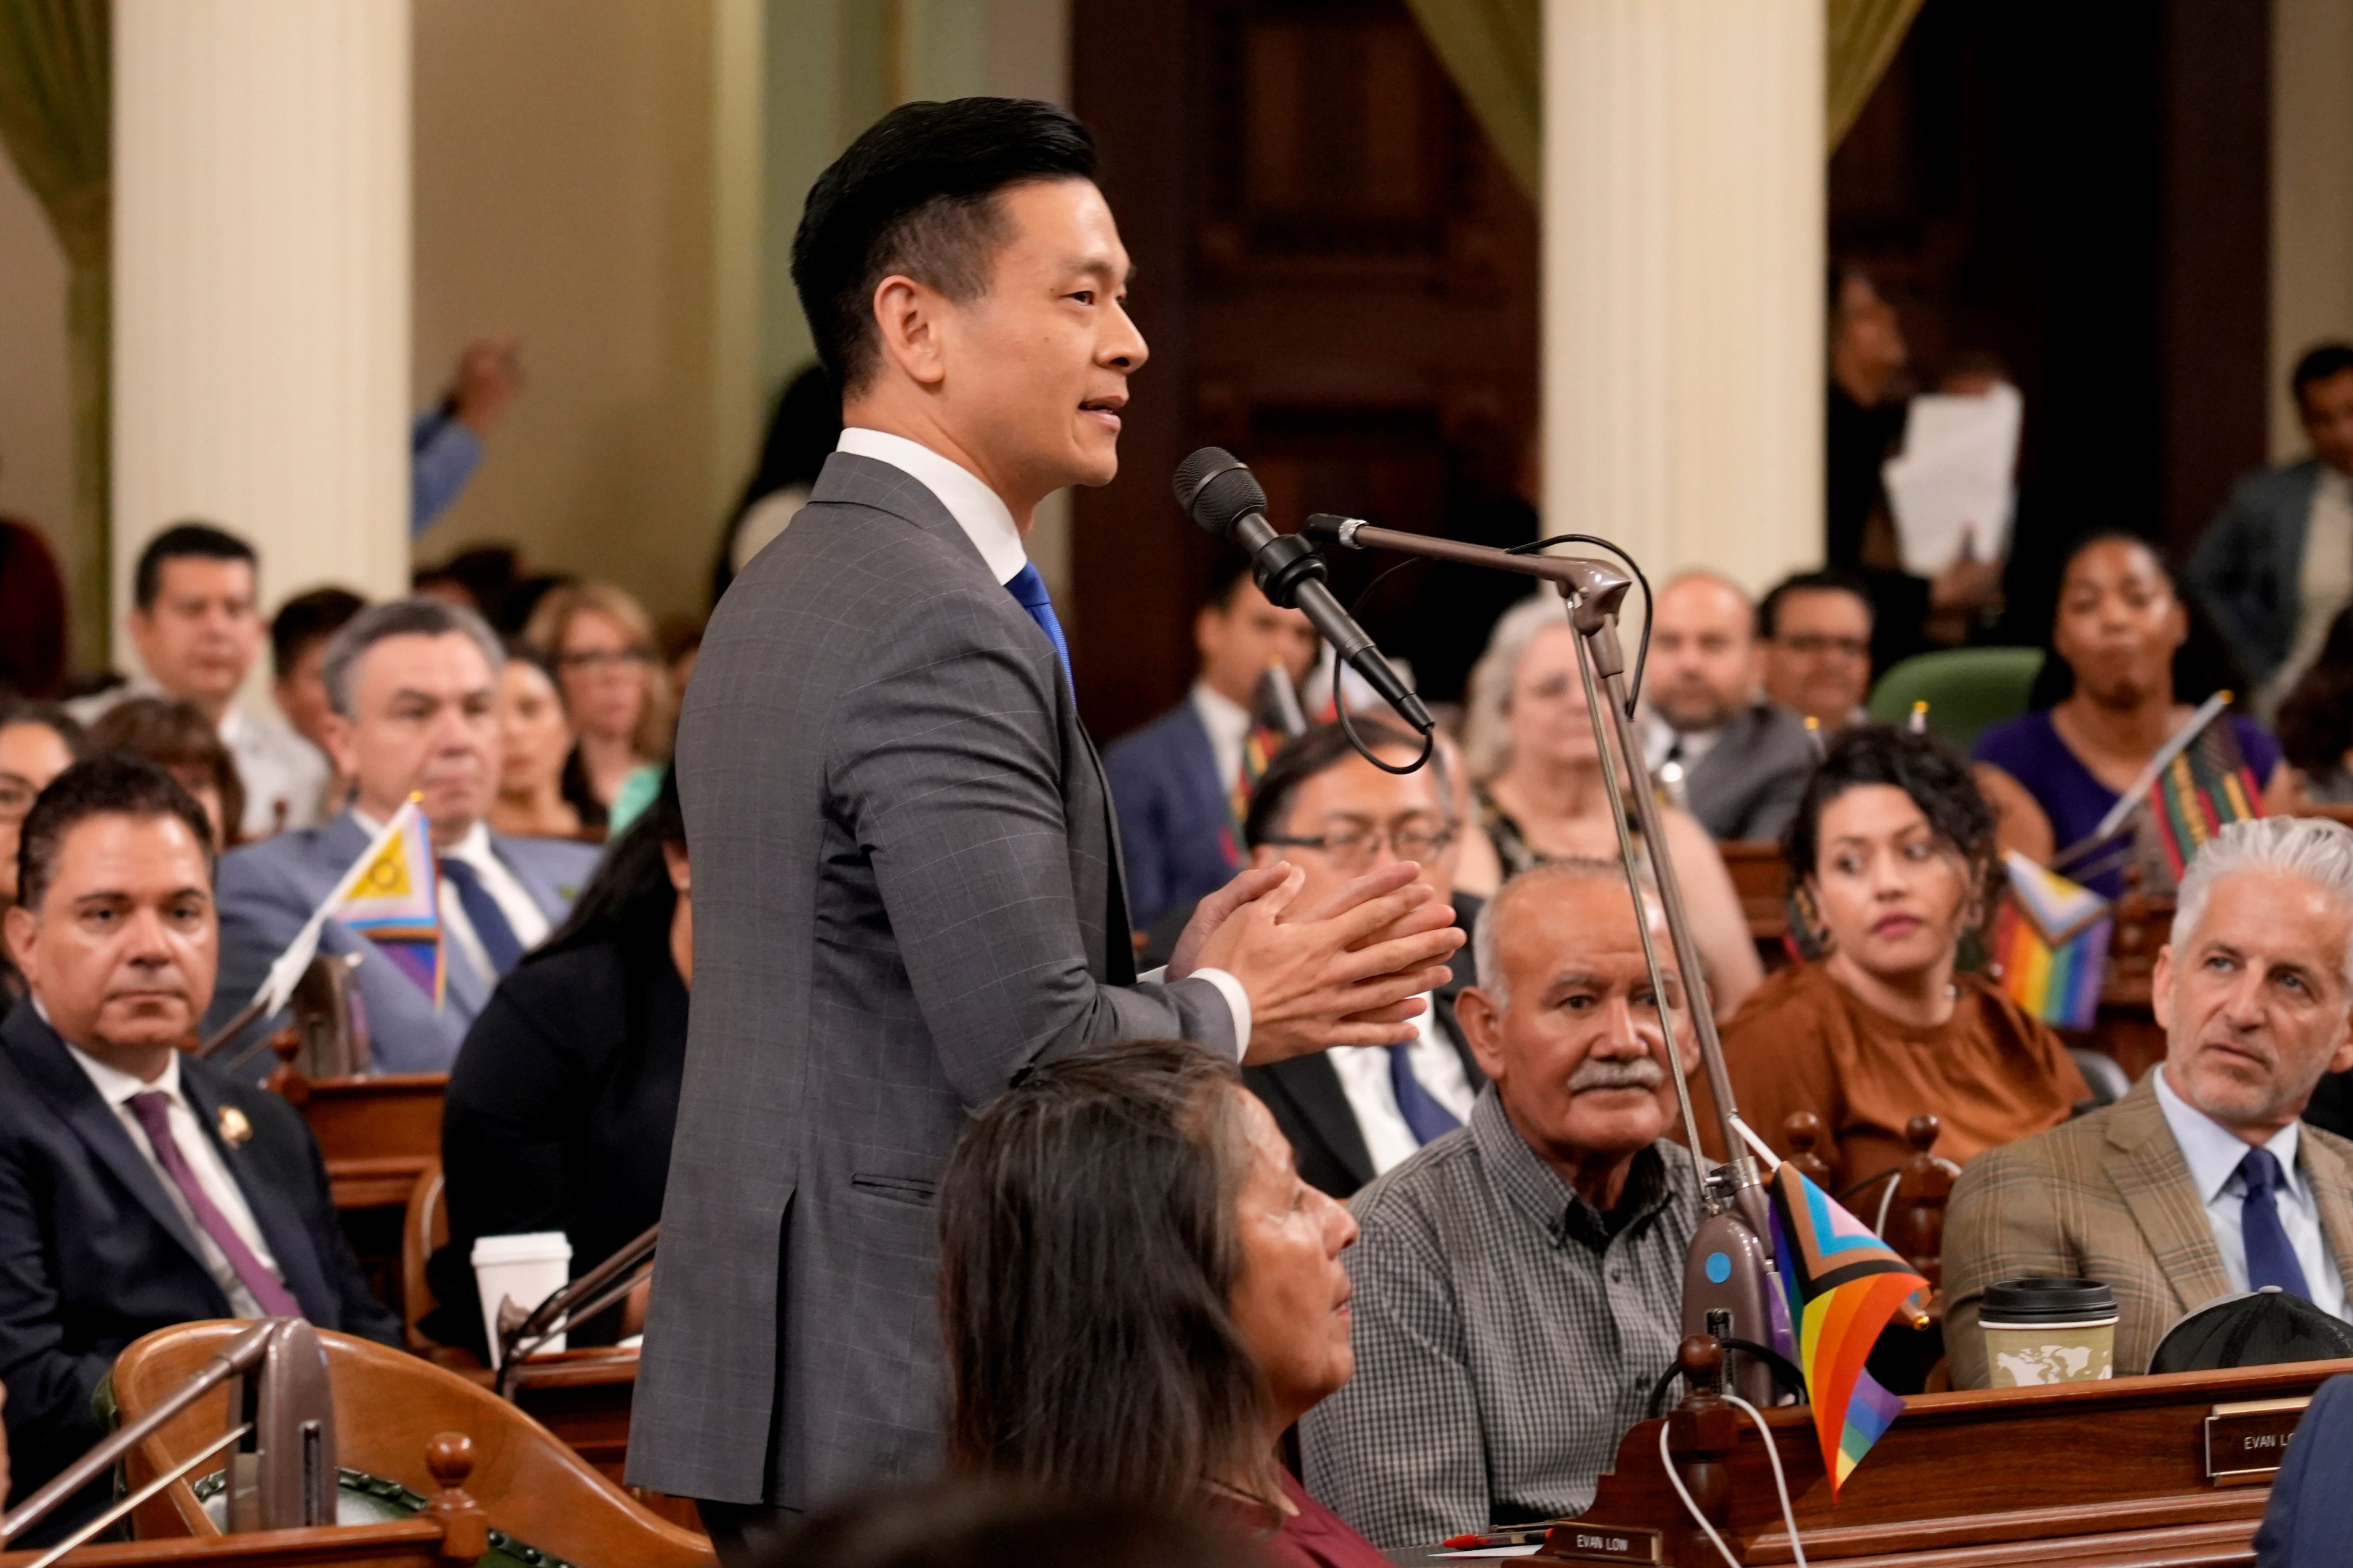 A person in a suit speaks at a microphone before a diverse audience in a formal chamber.